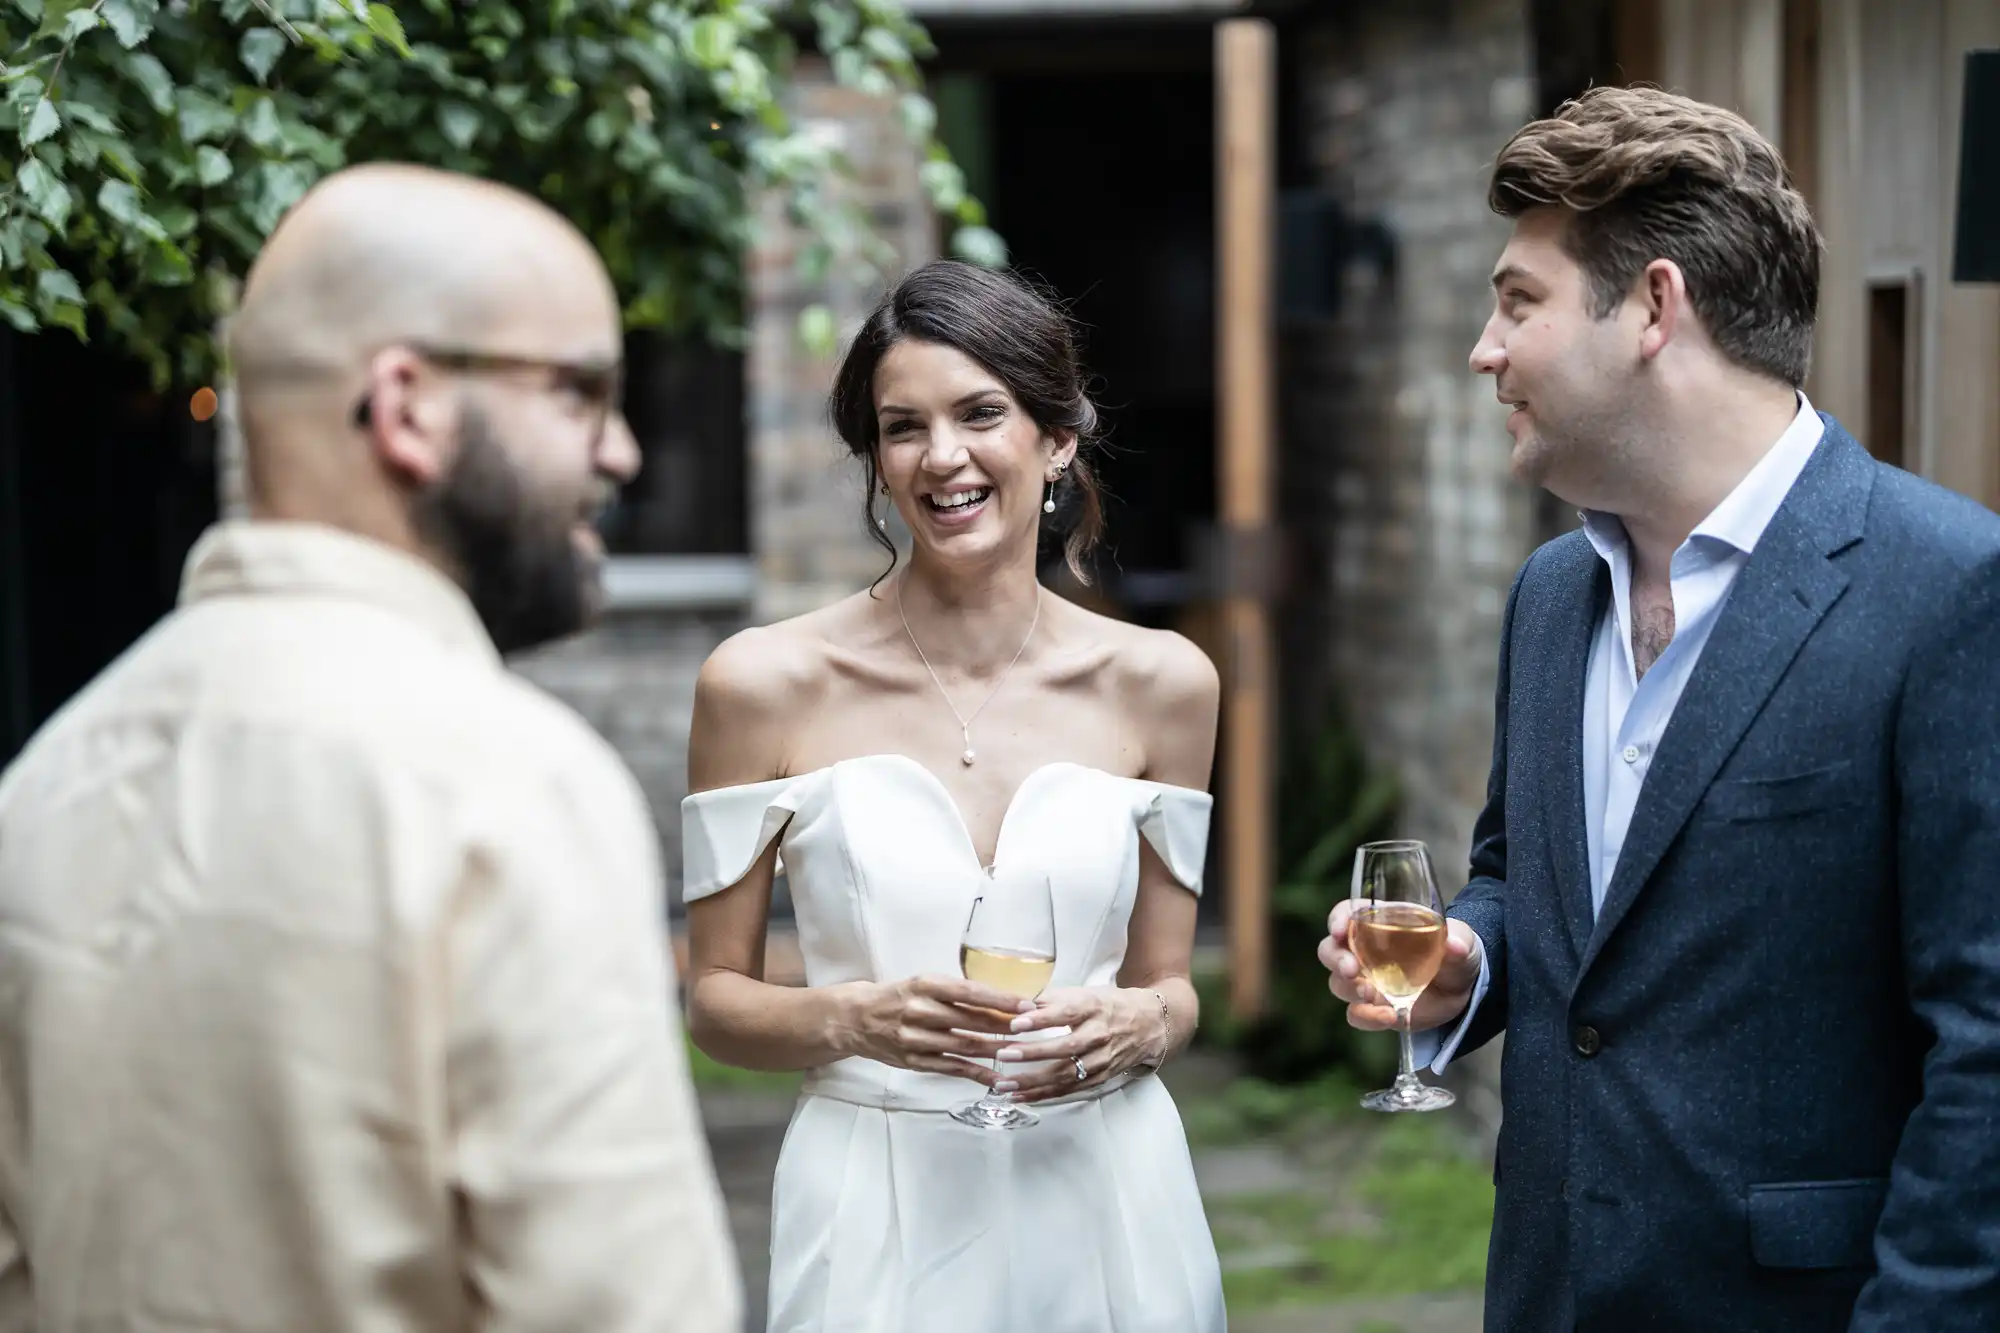 A bride in a white off-shoulder dress, holding a glass of wine, laughs joyfully while talking with two men in suits at an outdoor gathering.